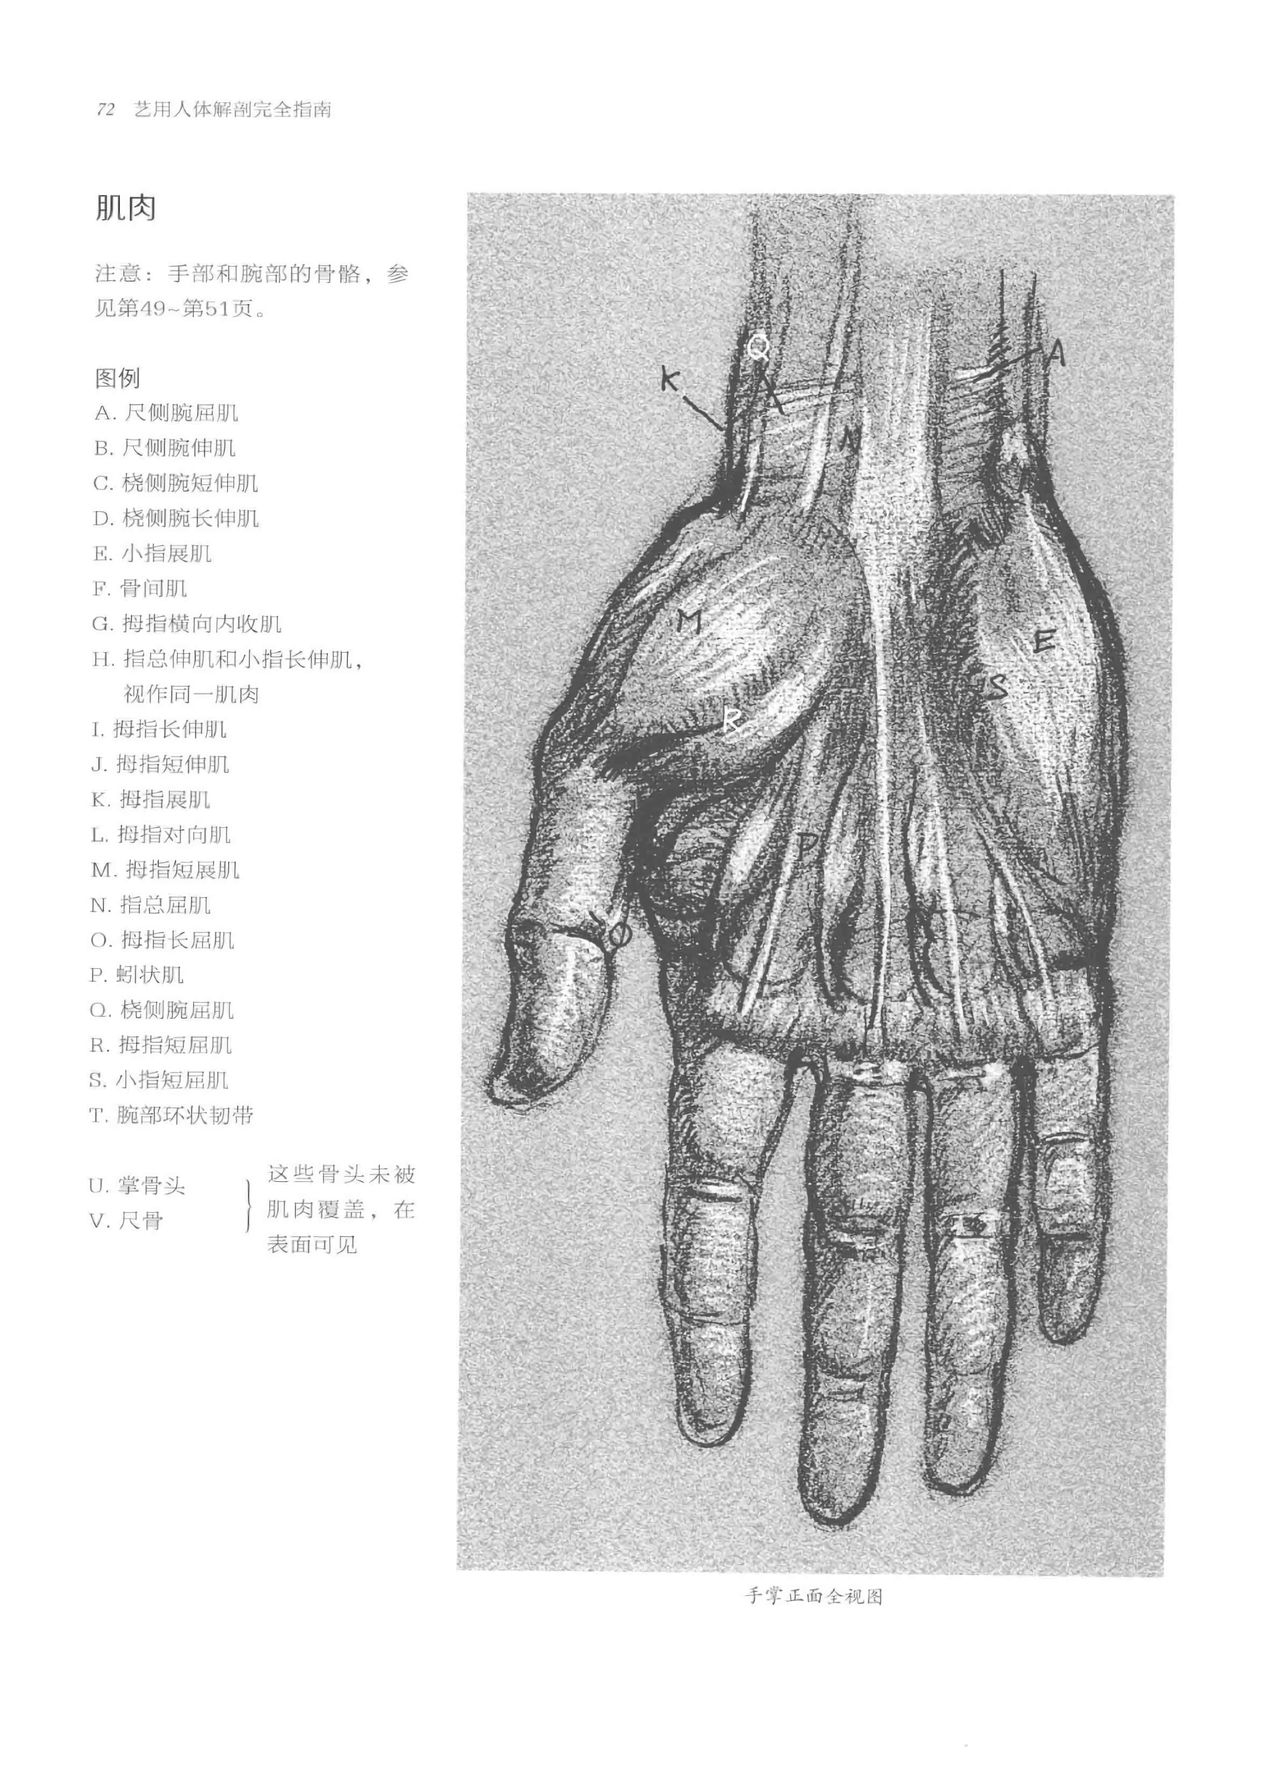 Anatomy-A Complete Guide for Artists - Joseph Sheppard [Chinese] 72